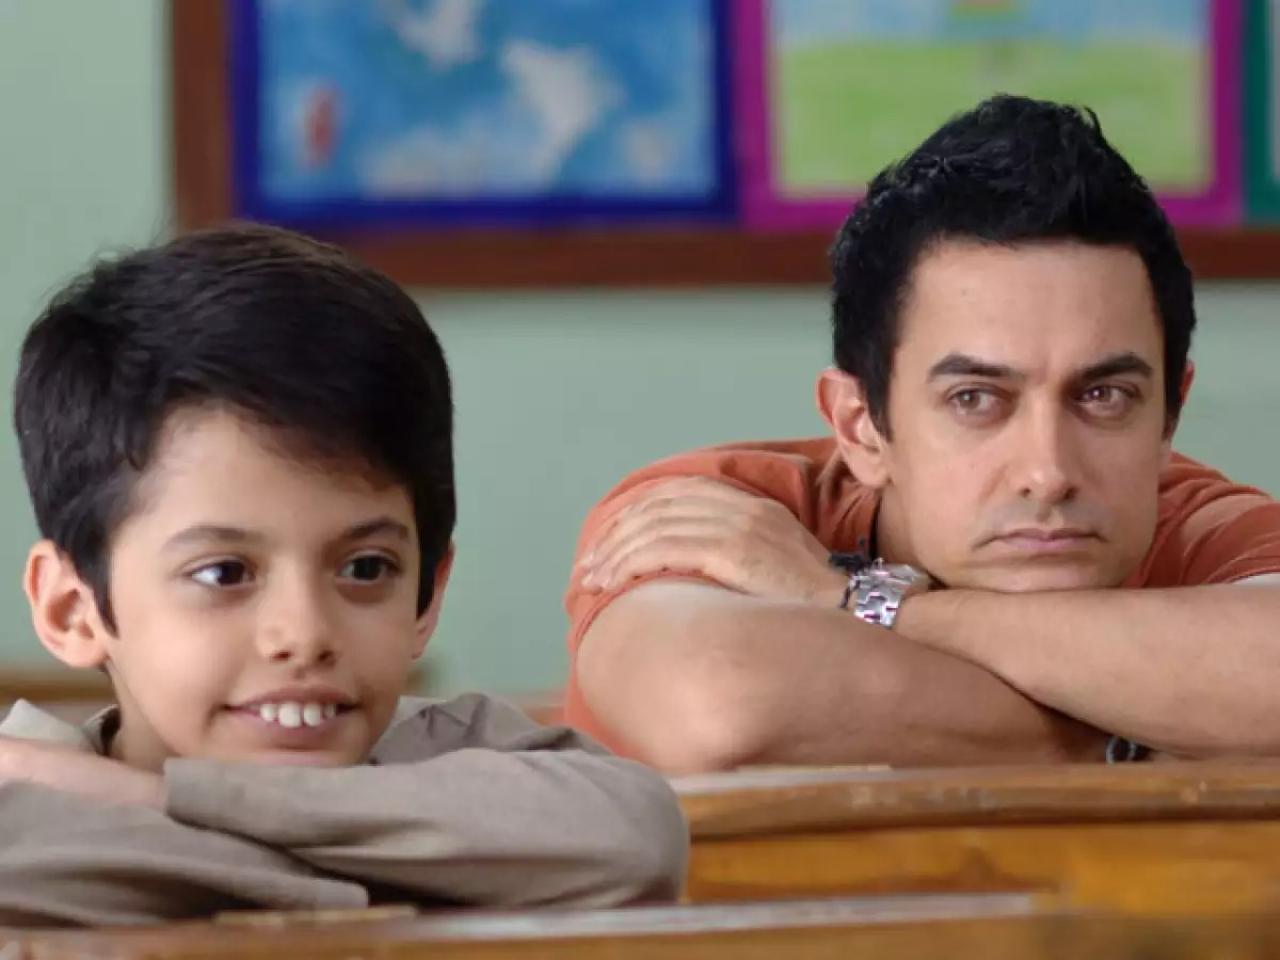 Taare Zameen Par (2007)
Ishaan, a young boy, growing under the shadow of his academically achieving brother, is criticised by his parents for his lack of focus on his studies. He is sent away to a boarding school for a more 'disciplined' approach to studies against his will. However, Ram, the art teacher realises he has dyslexia and helps him uncover his potential. 
From the struggles of a child with learning disability to the pure child-like innocence portrayed by Darsheel Safary, this is an emotional ride and makes for a perfect watch today